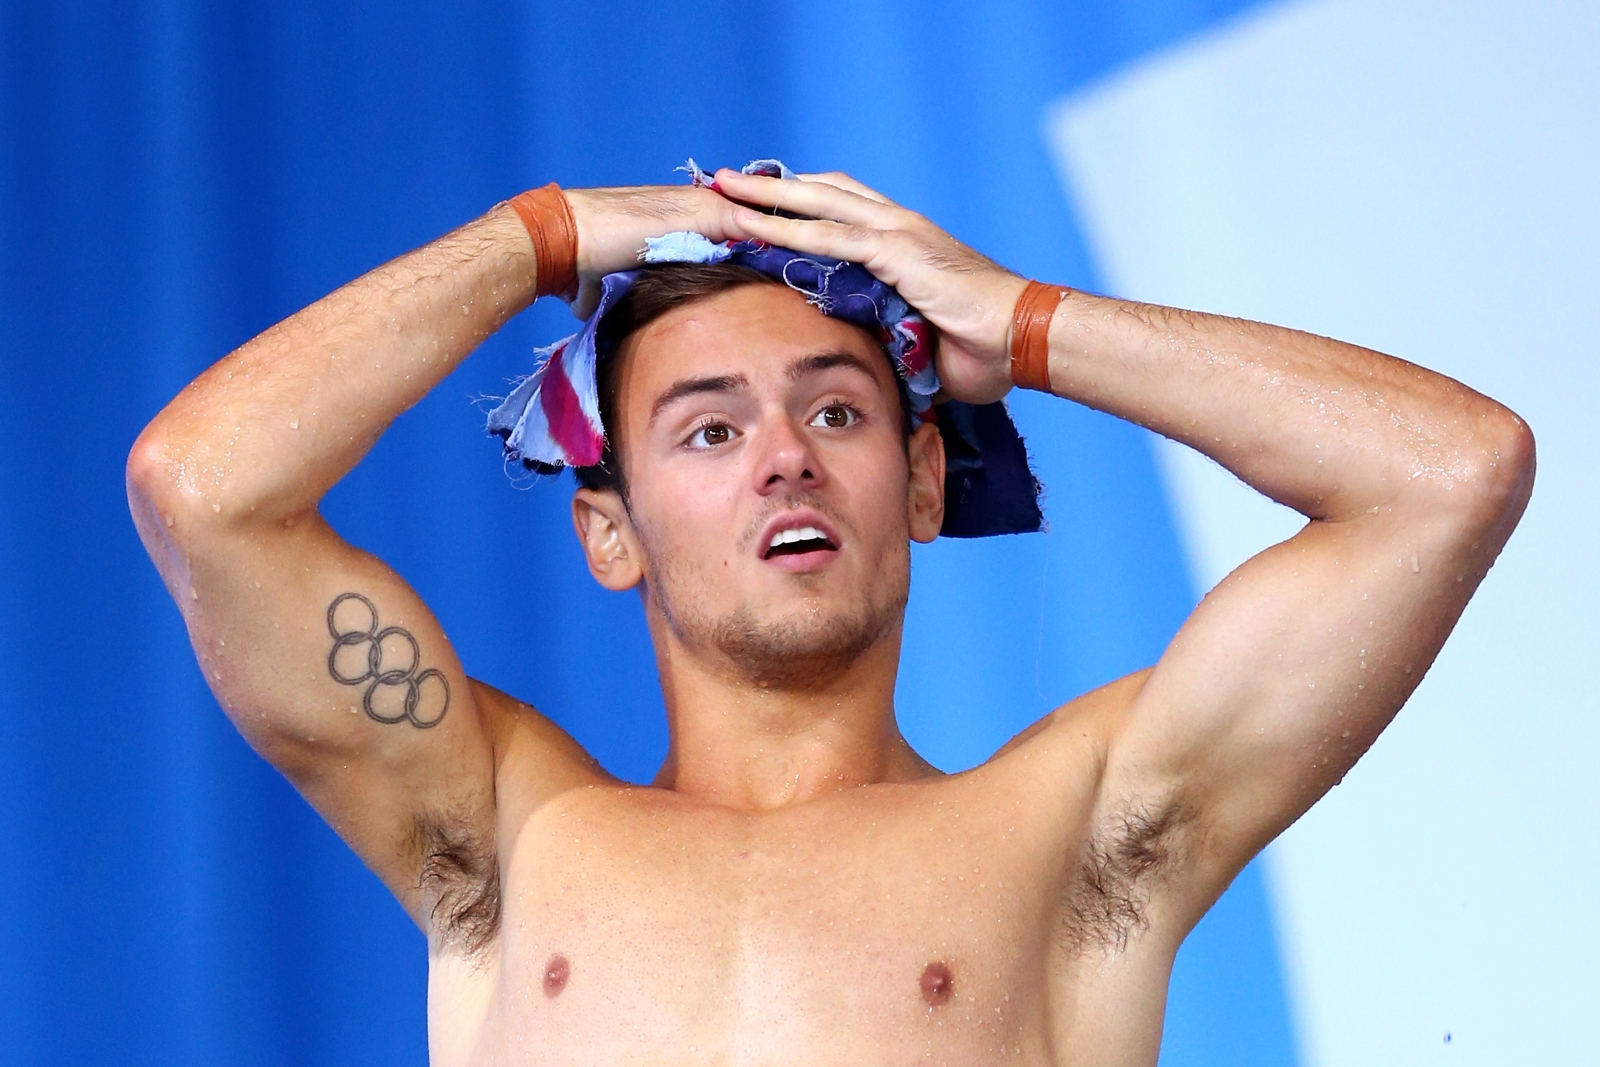 Glasgow 2014 Tom Daley Denied 10m Synchronised Diving Gold by